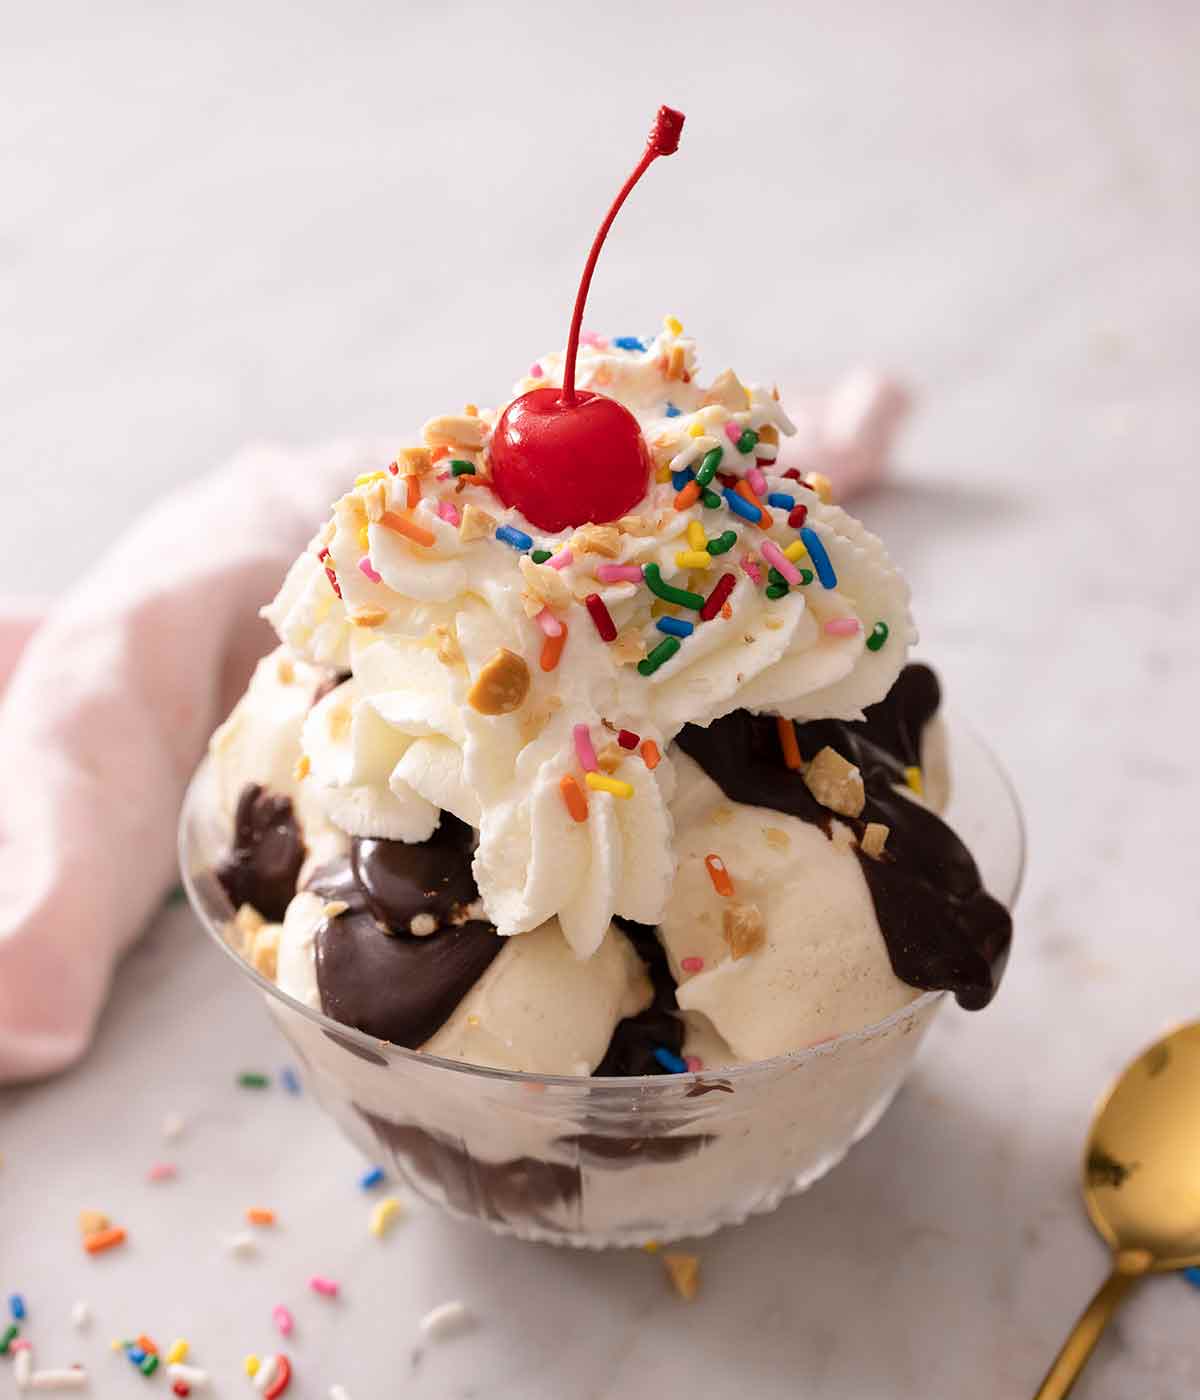 A hot fudge sundae in a glass bowl topped with whipped cream, sprinkles, nuts, and a cherry.